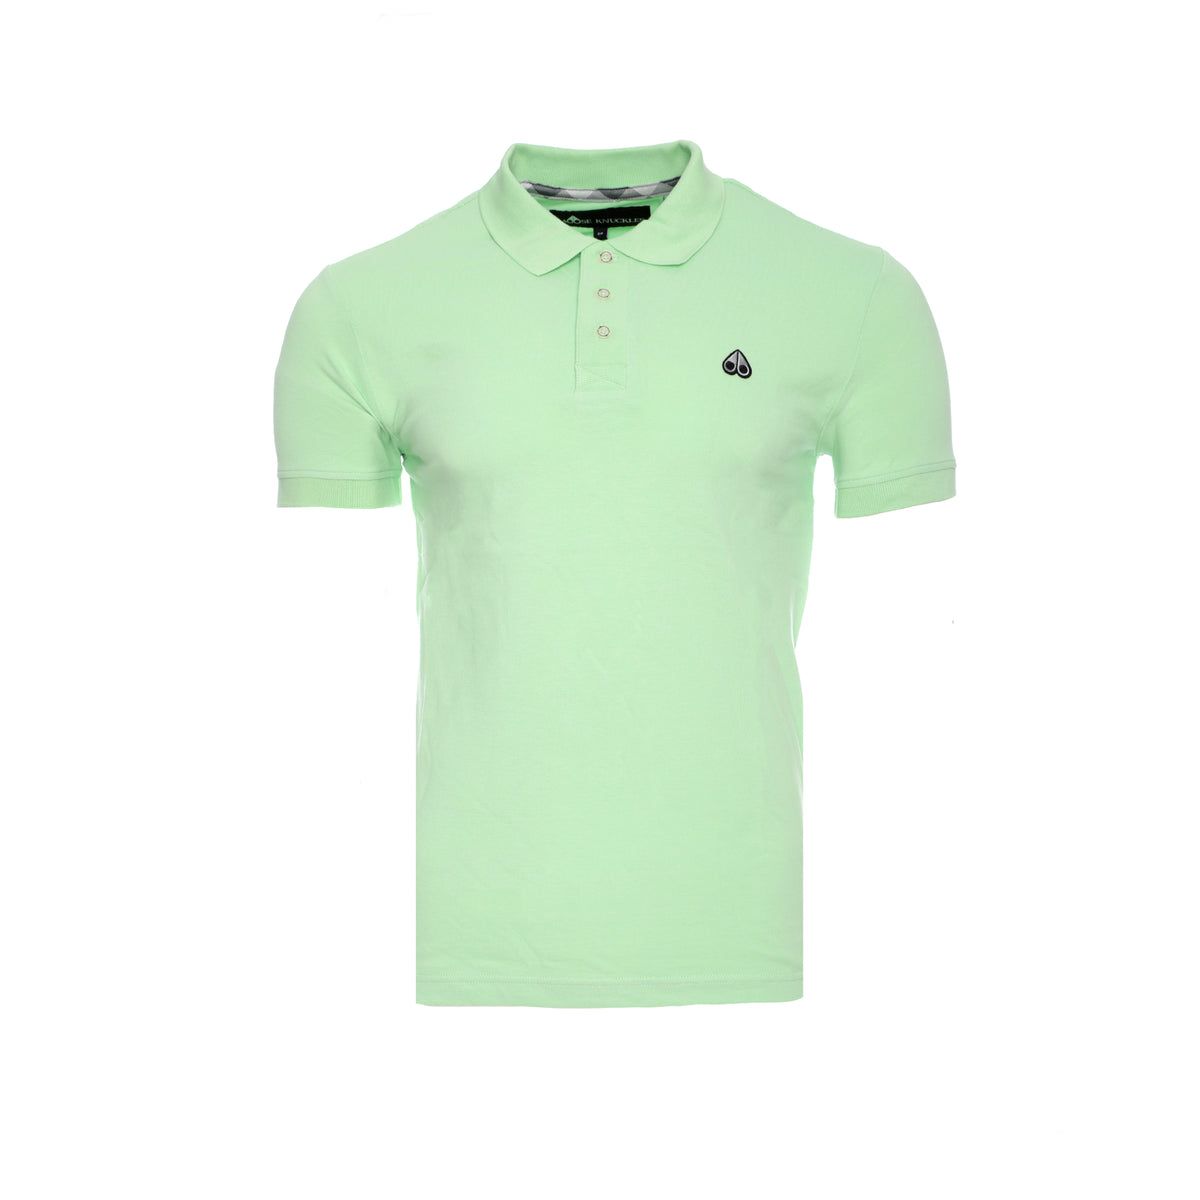 Moose Knuckles Men's Classic Polo Shirt Lime